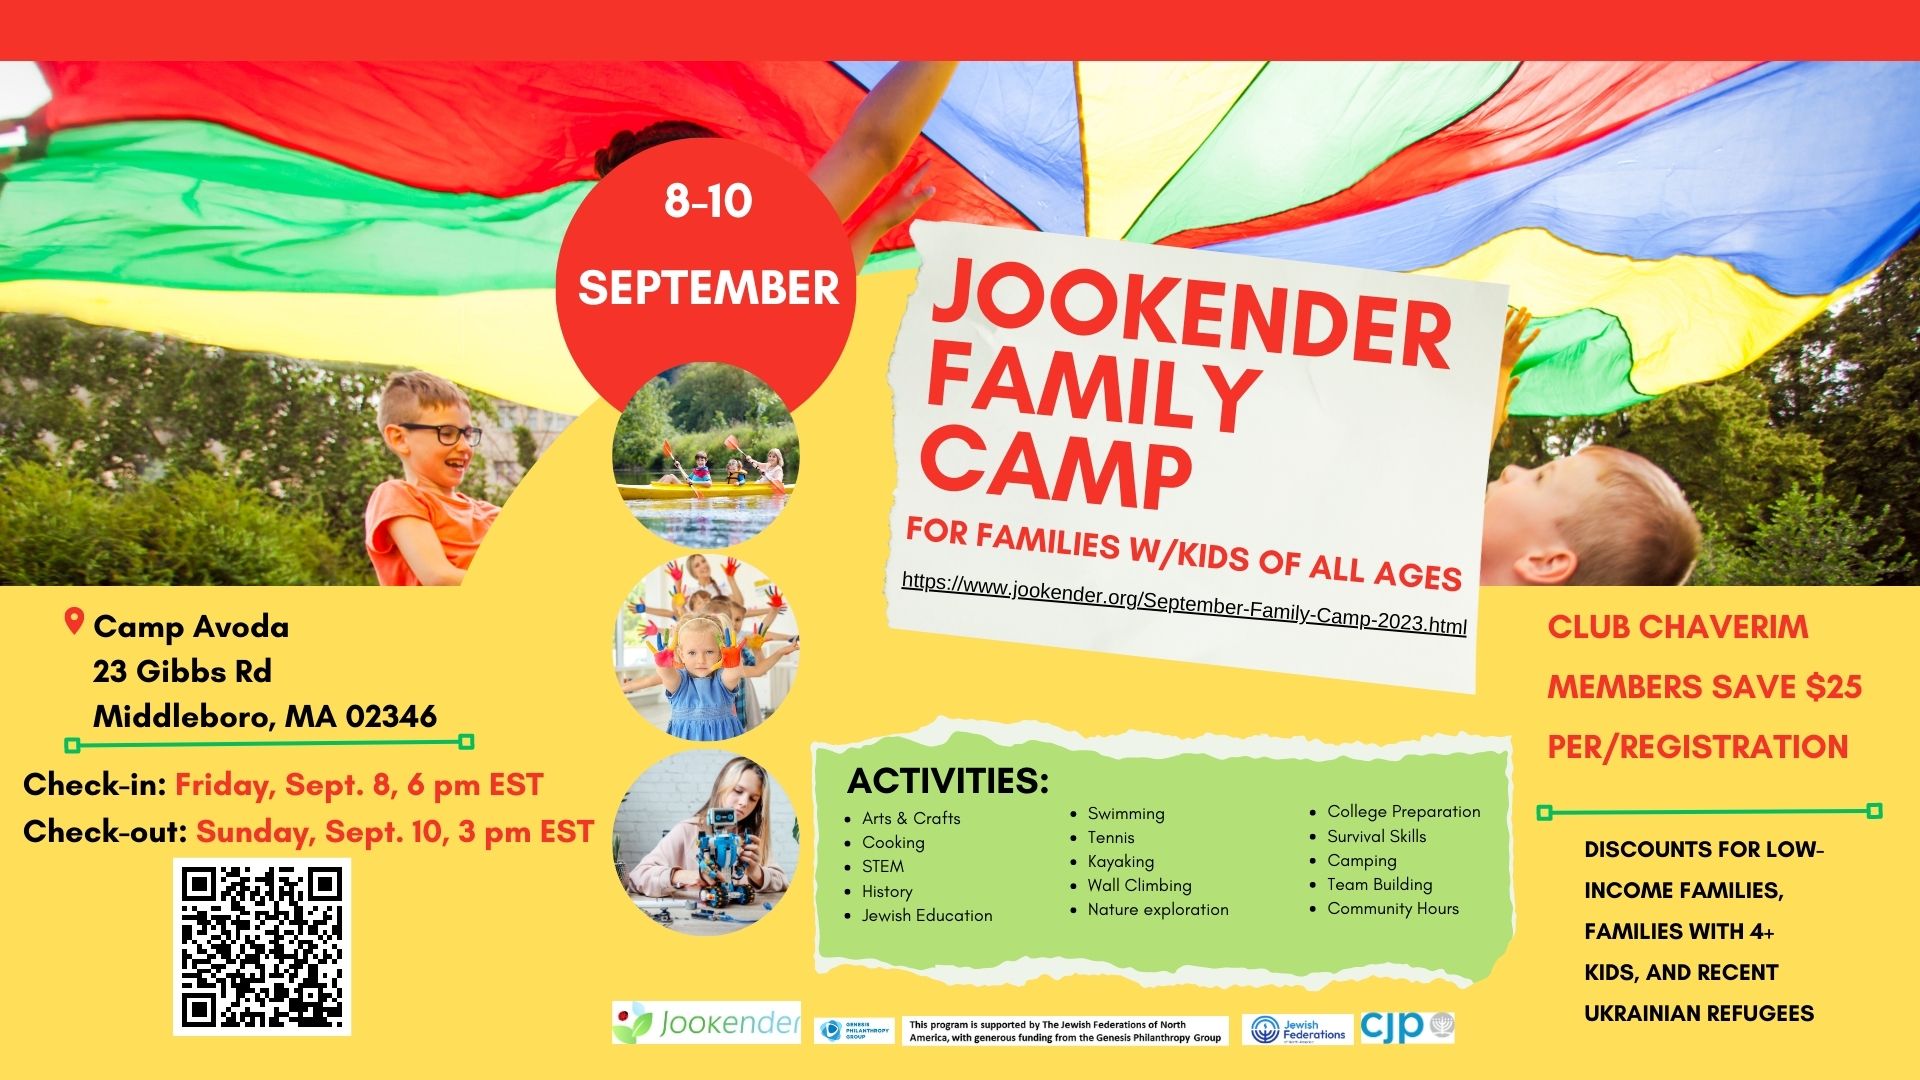 Jookender Family Camp - Add another Participant to your Unit